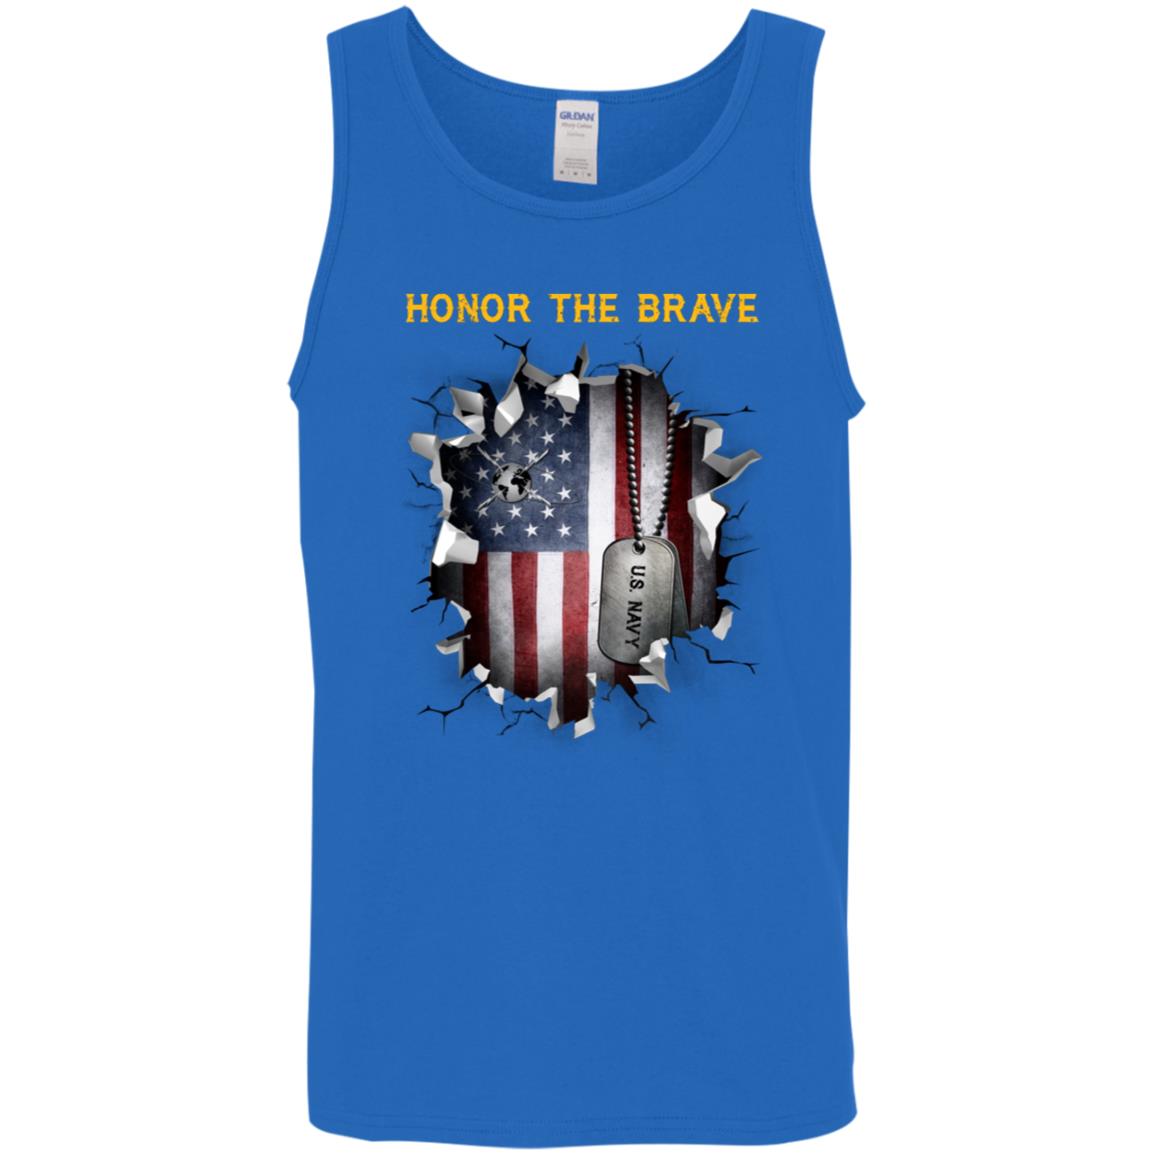 Navy Mass Communications Specialist Navy MC - Honor The Brave Front Shirt